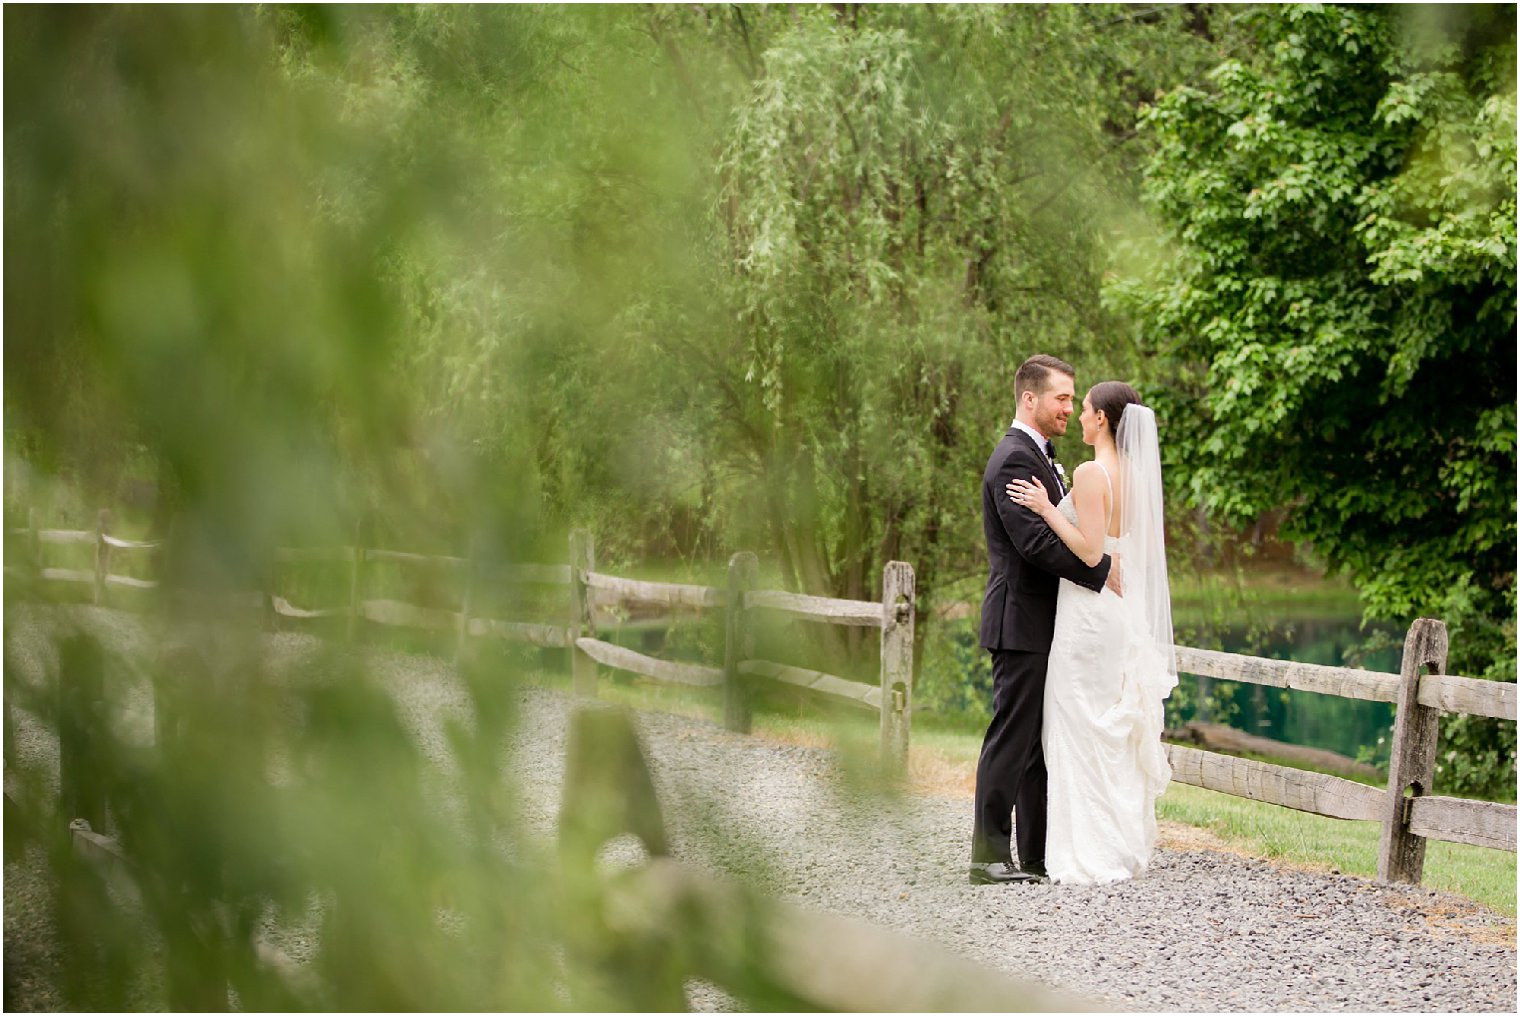 Wedding photo with willow trees